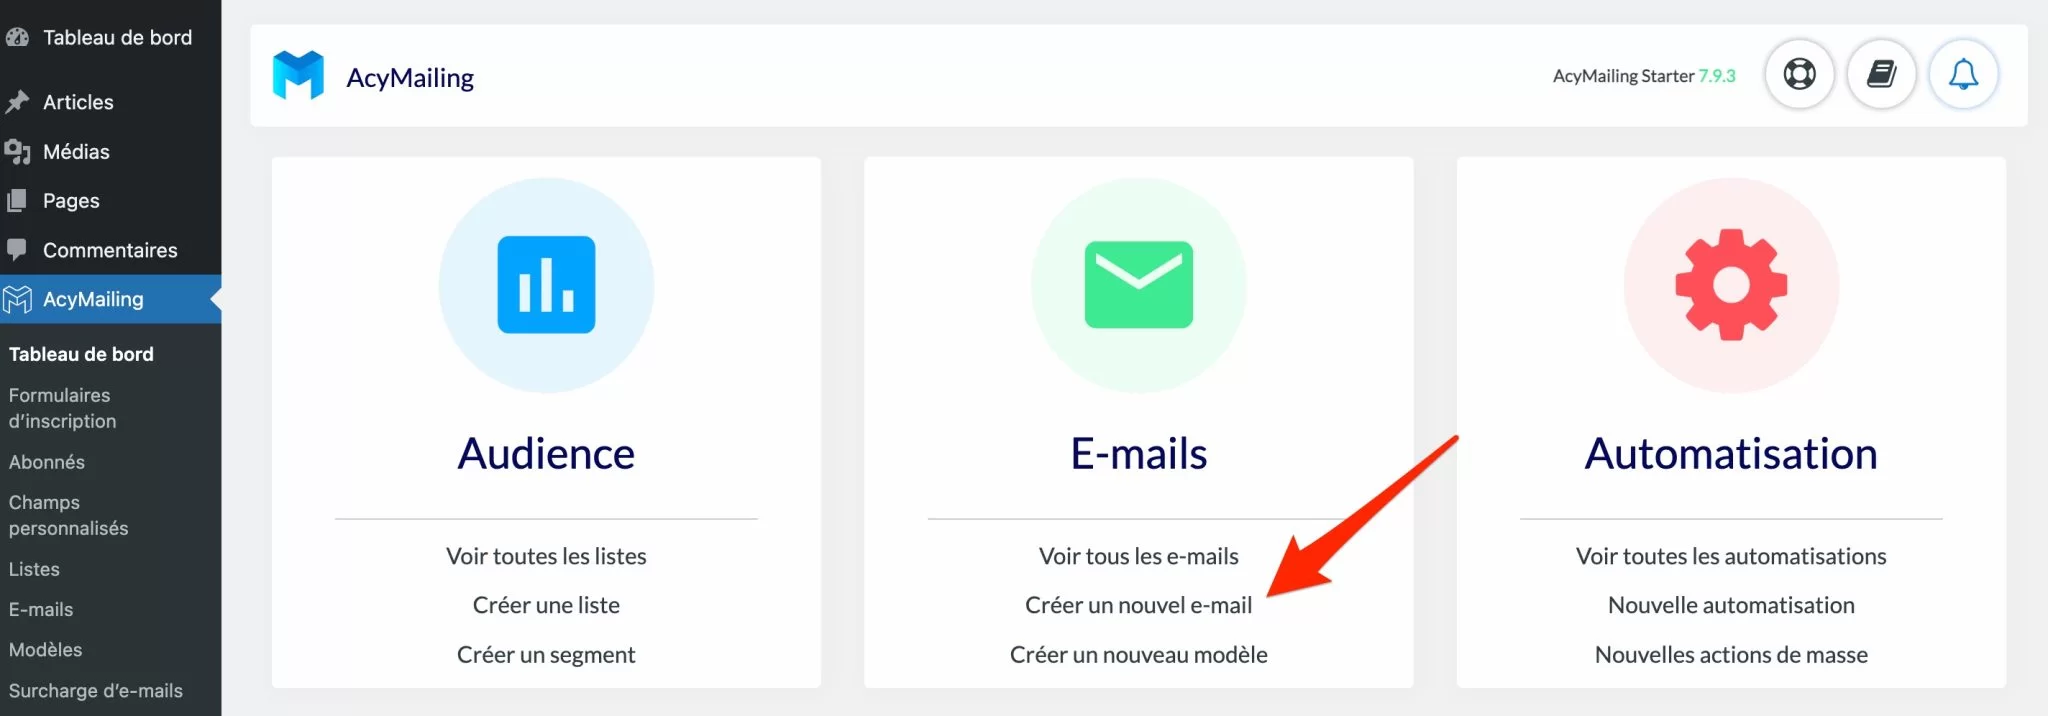 Creation of a newsletter with AcyMailing.